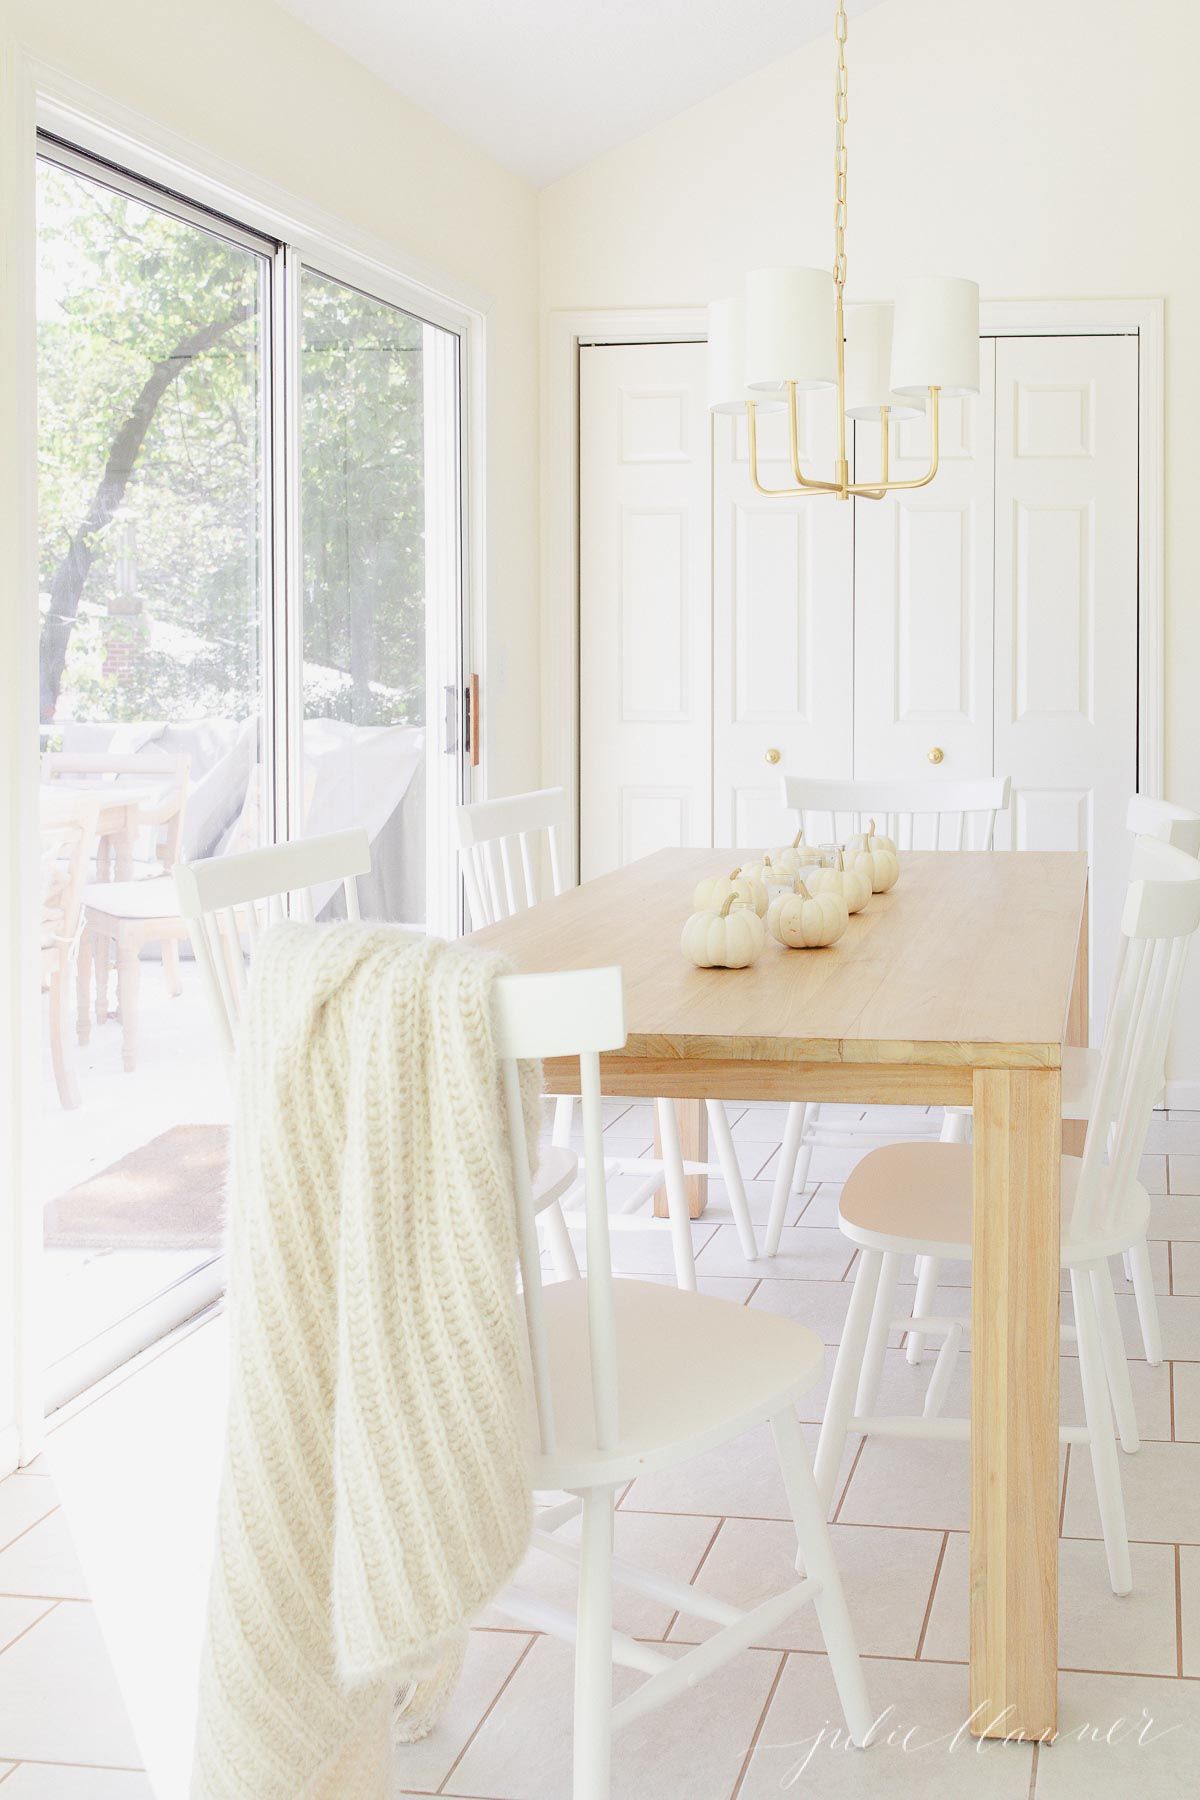 A white kitchen with a teak table, cozy blanket draped across the back of a chair